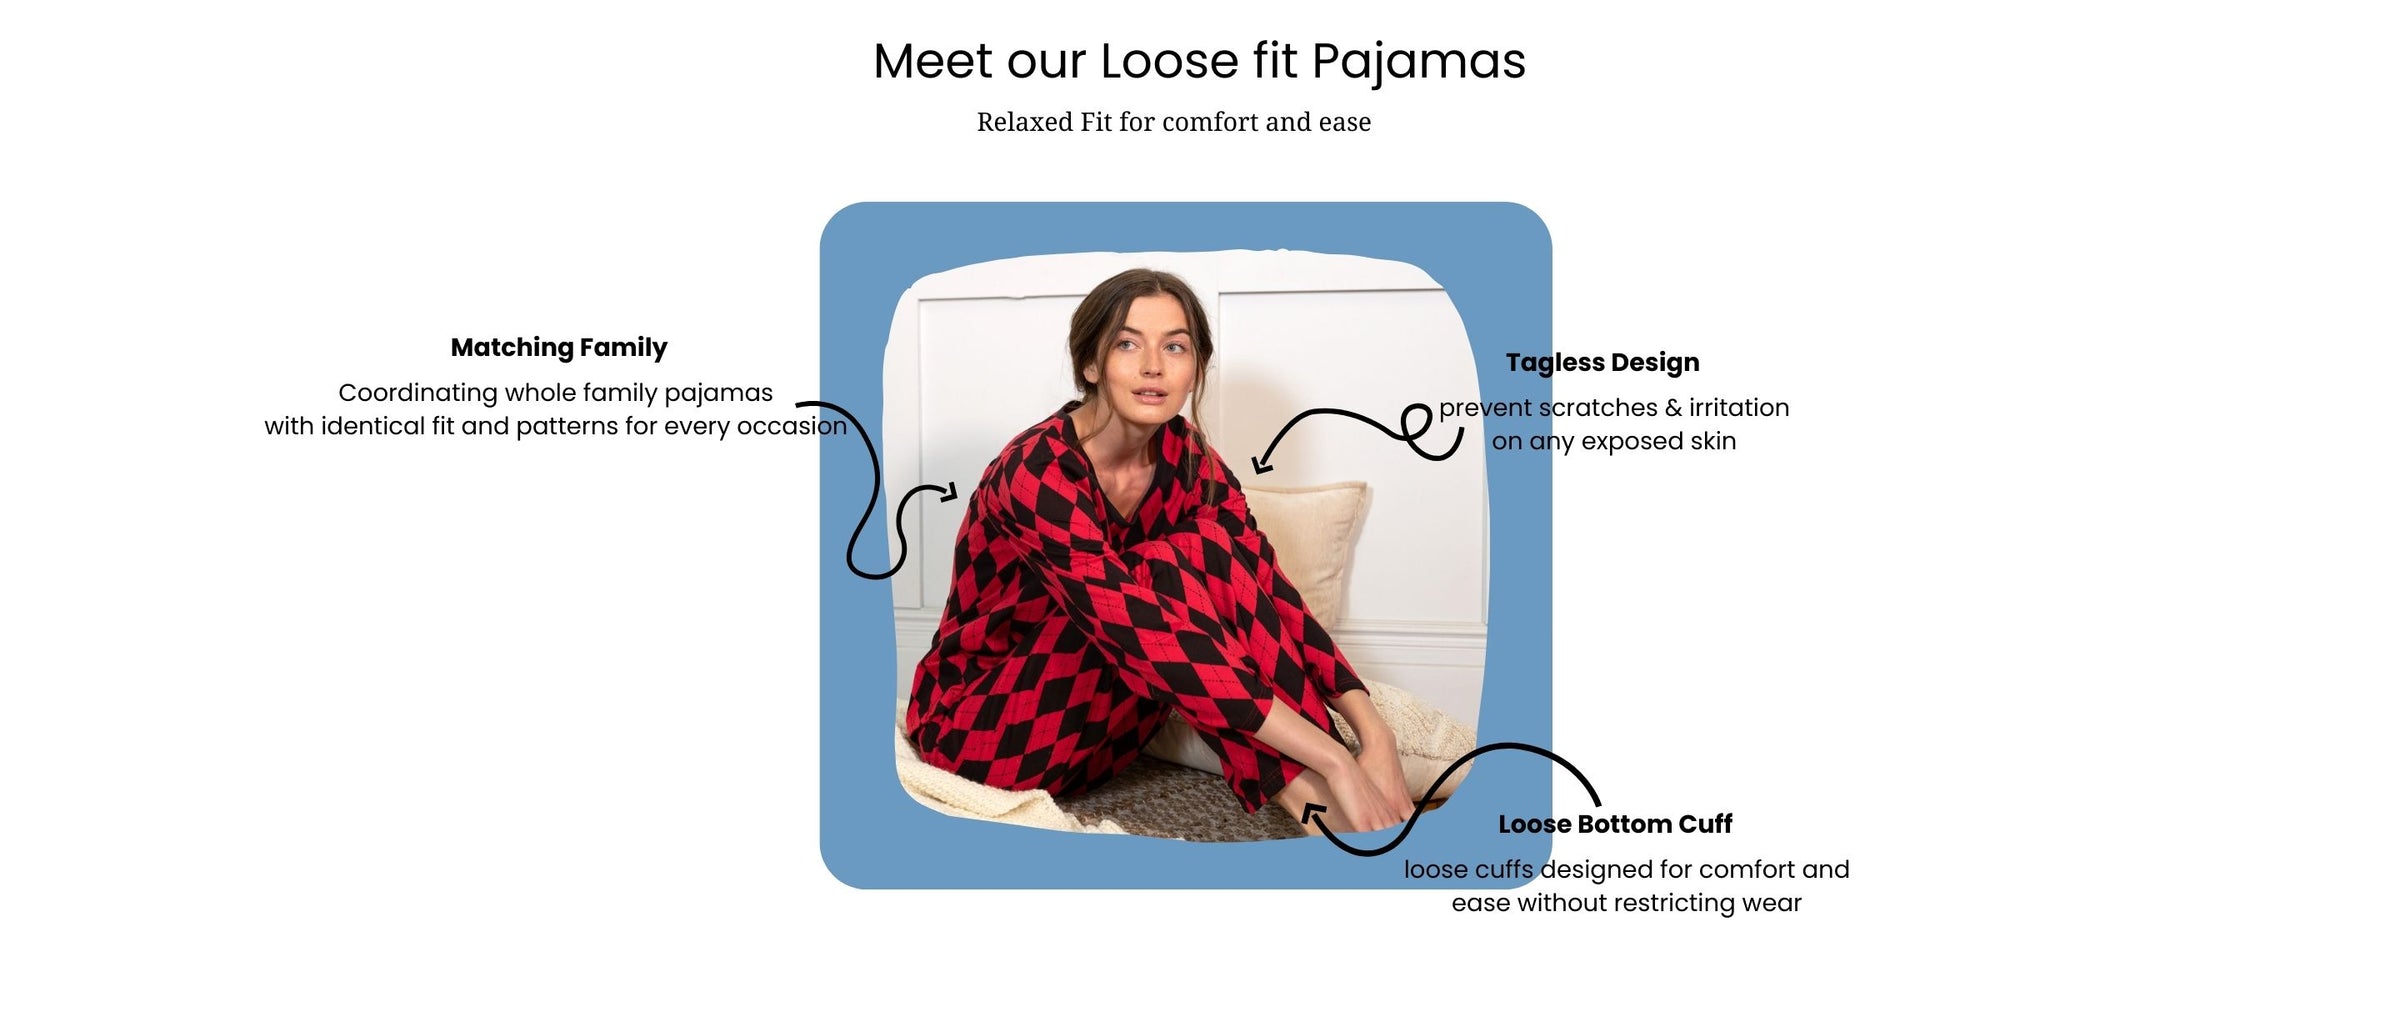 meet our loose fit pajamas, woman wearing black and red loose fit argyle pajama